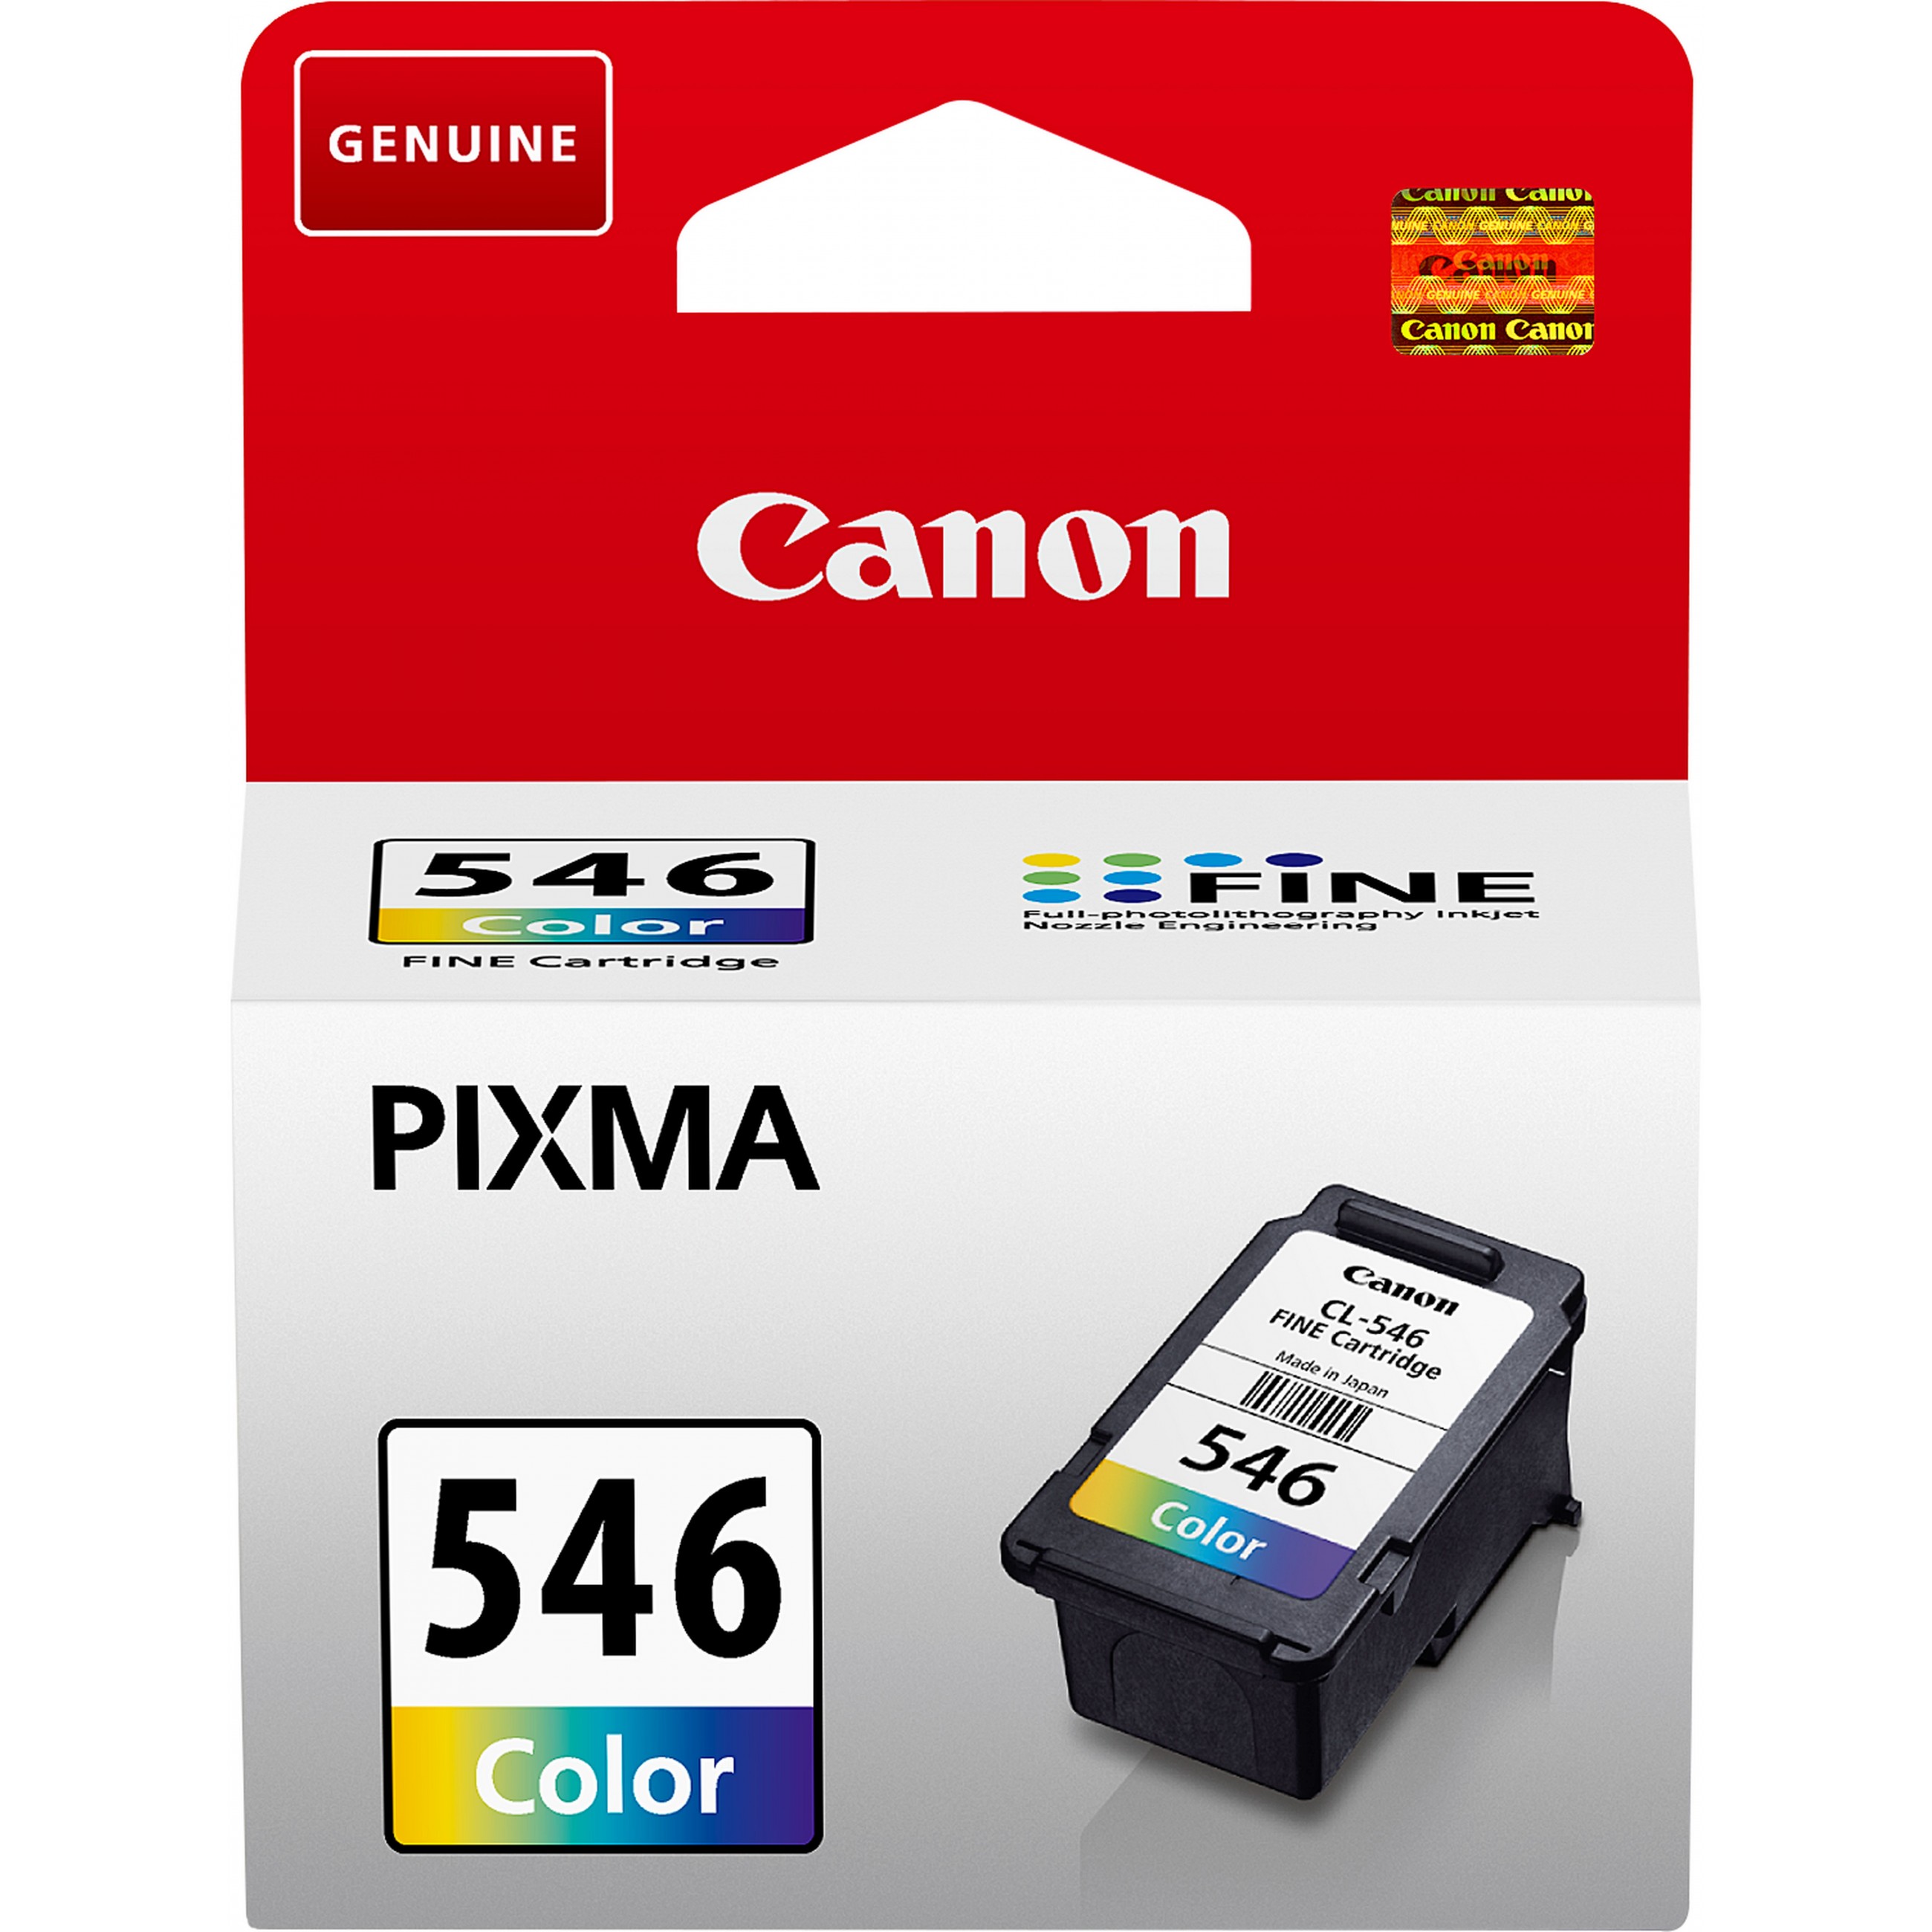 Canon CL-546 ink cartridge